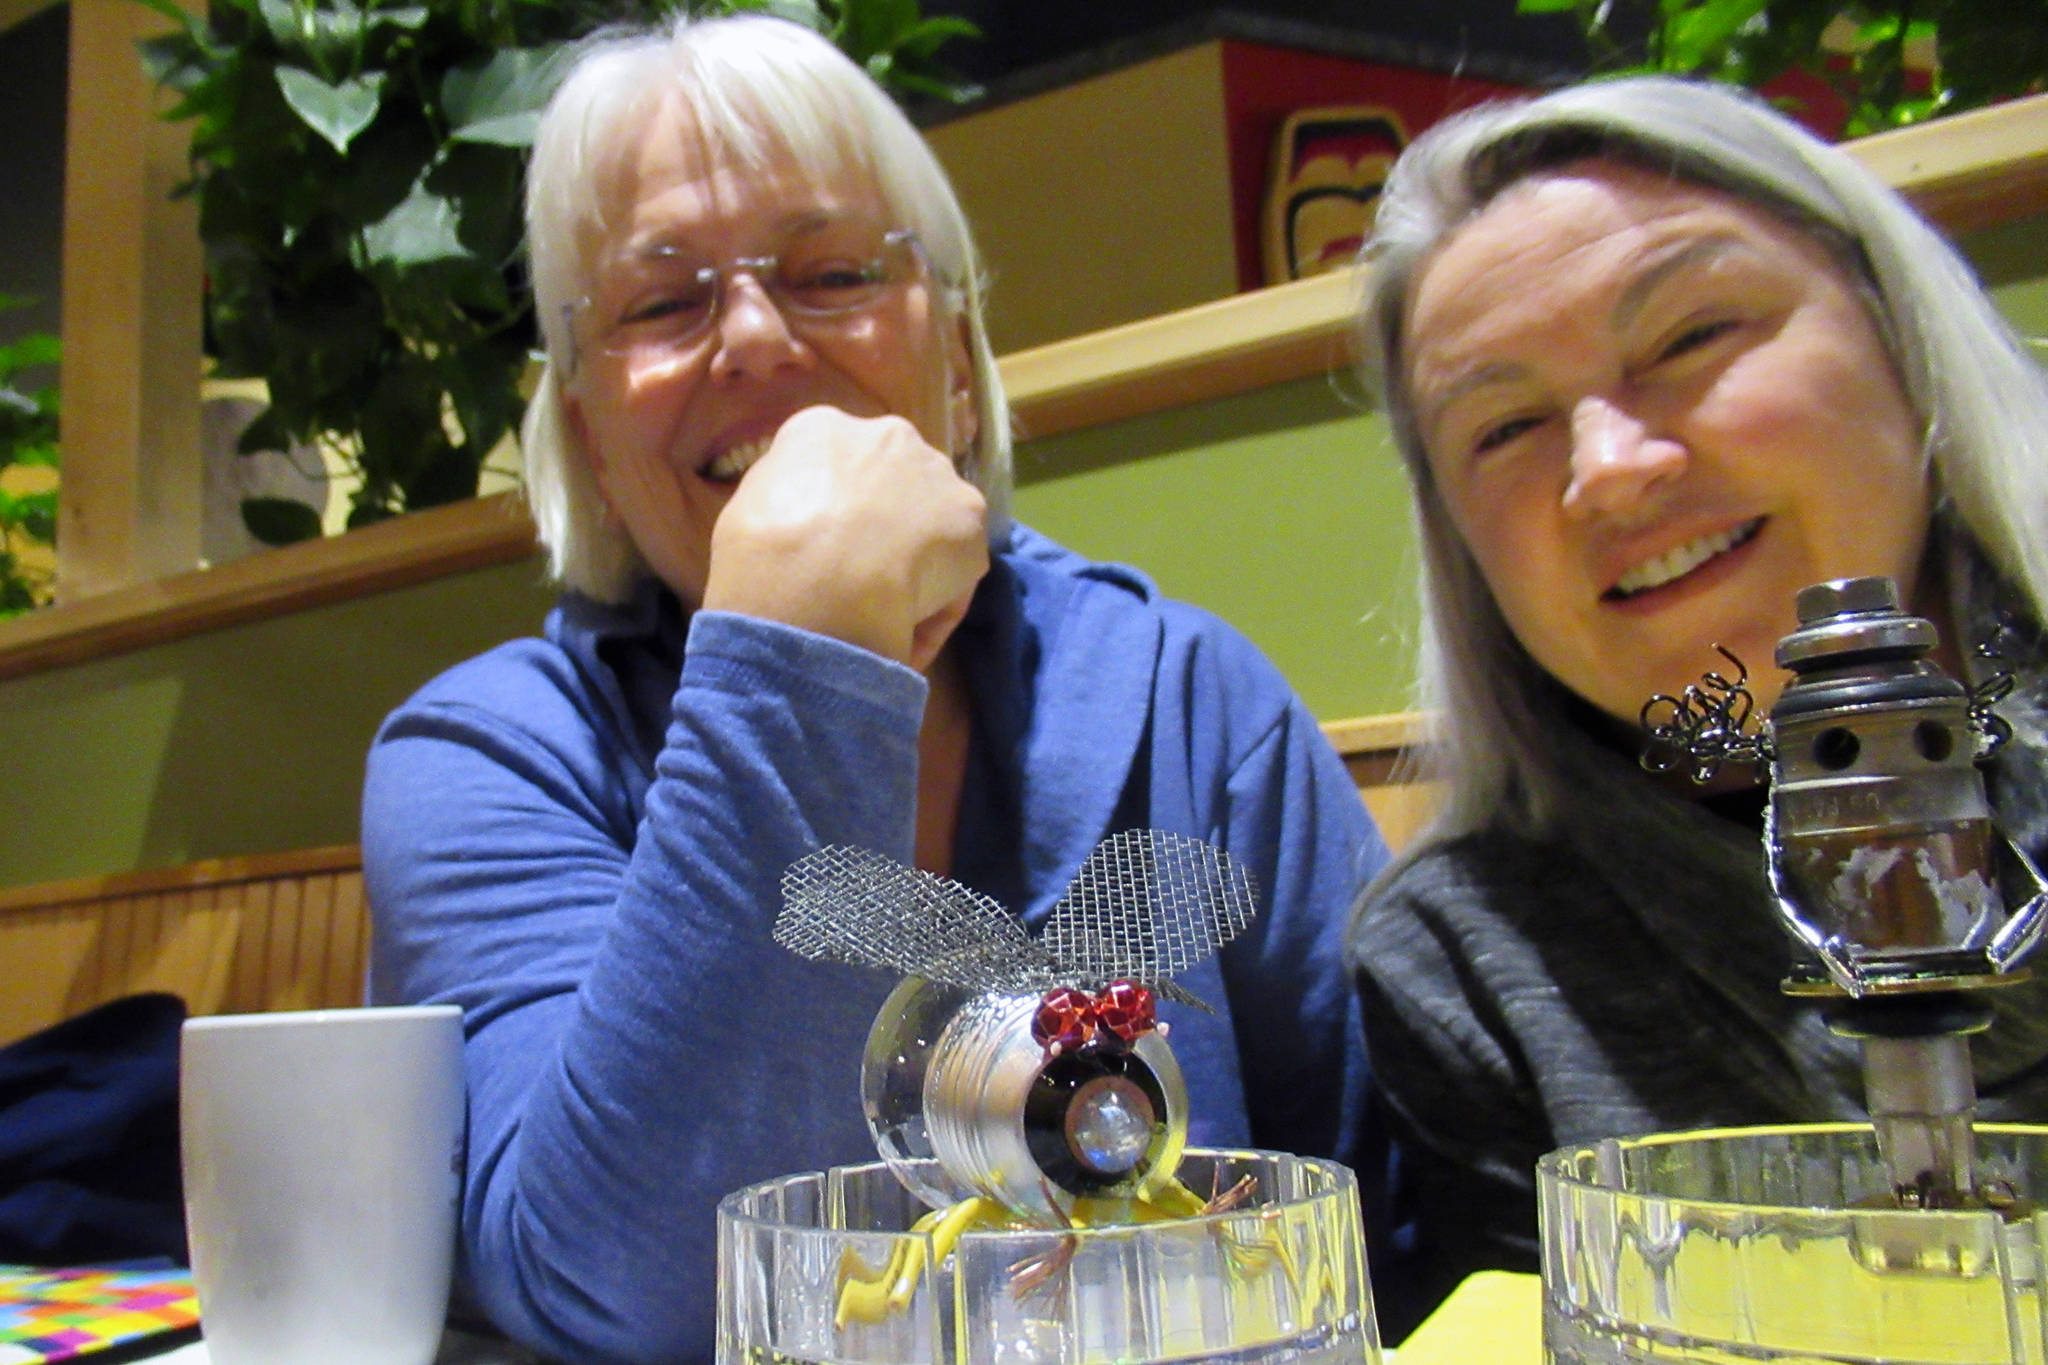 Rotarians Candy Behrends and Diane Kyser smile while talking about a planned assemblage art show and building contest near pieces of art made from household items, Tuesday, March 12, 2019. (Ben Hohenstatt | Juneau Empire)